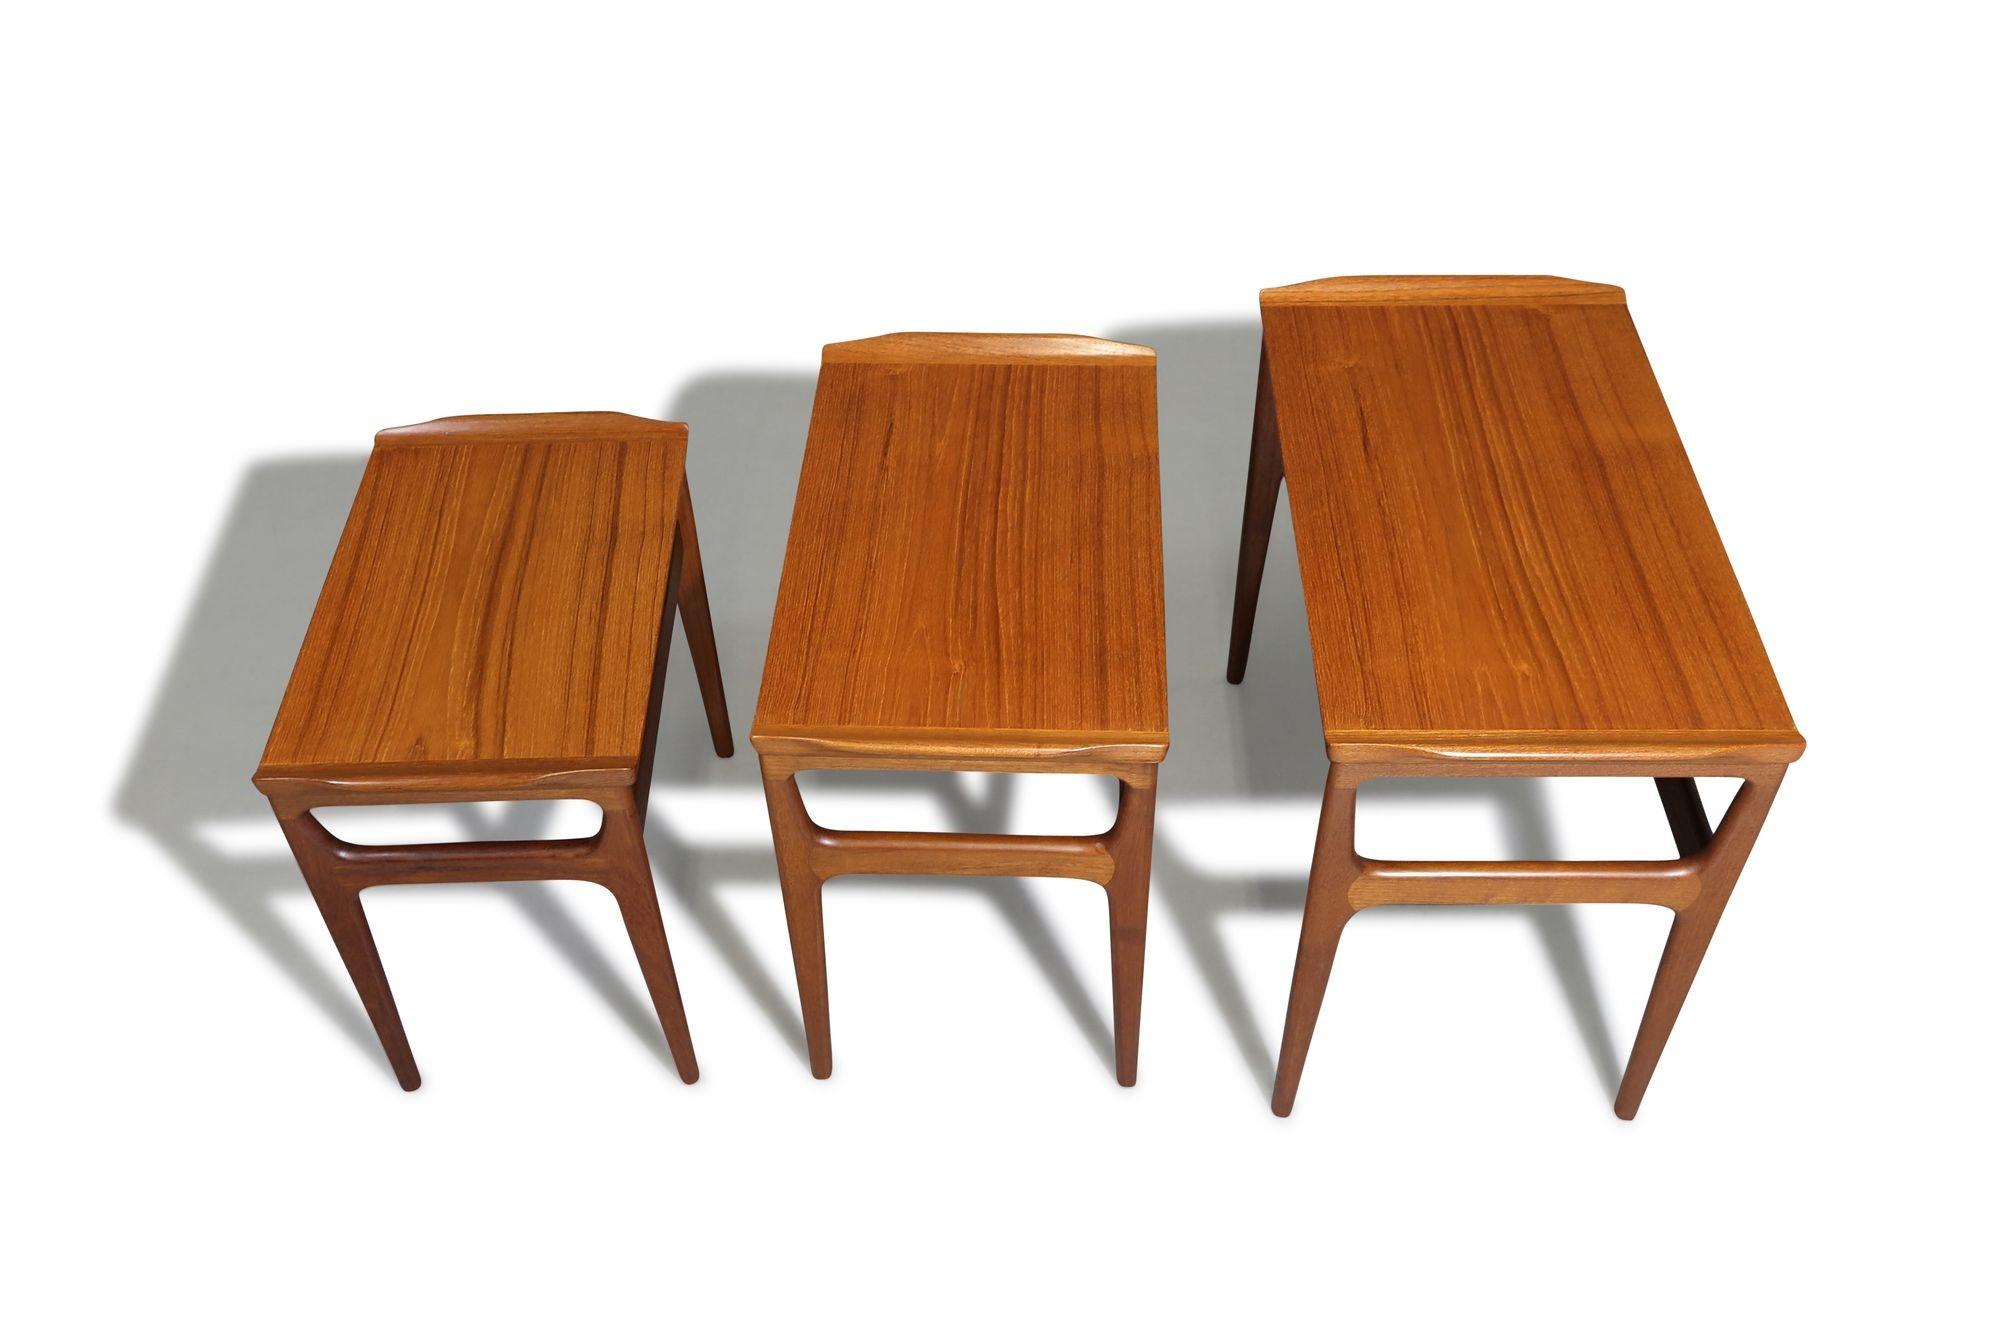 Erling Torvits Danish Teak Nesting Side Tables In Excellent Condition For Sale In Oakland, CA